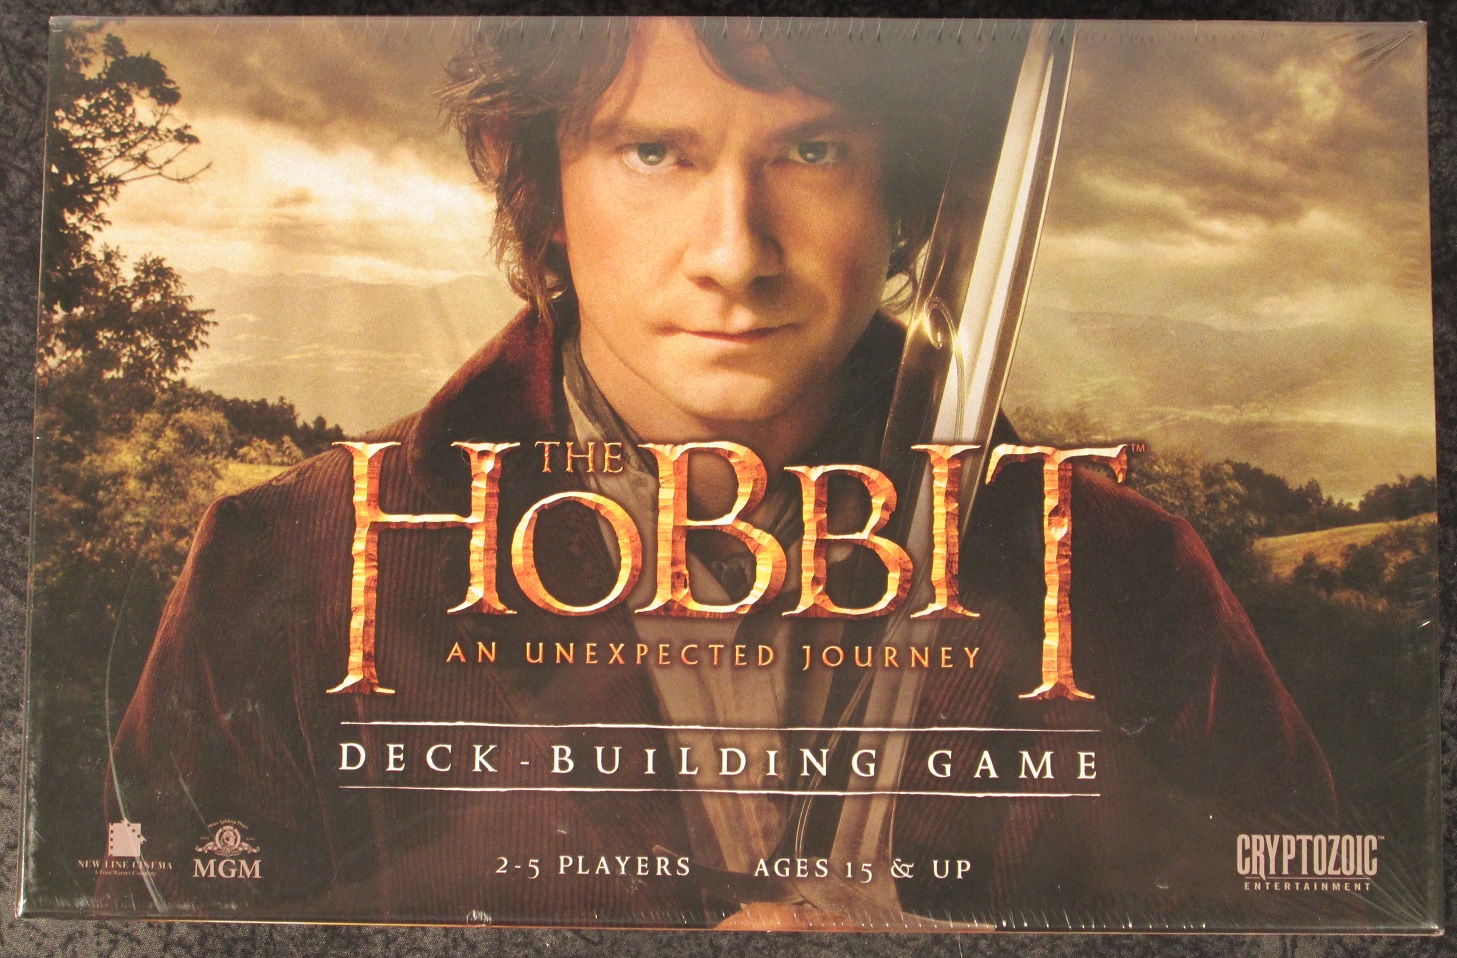 Cryptozoic - The Hobbit: An Unexpected Journey Deck Building Game